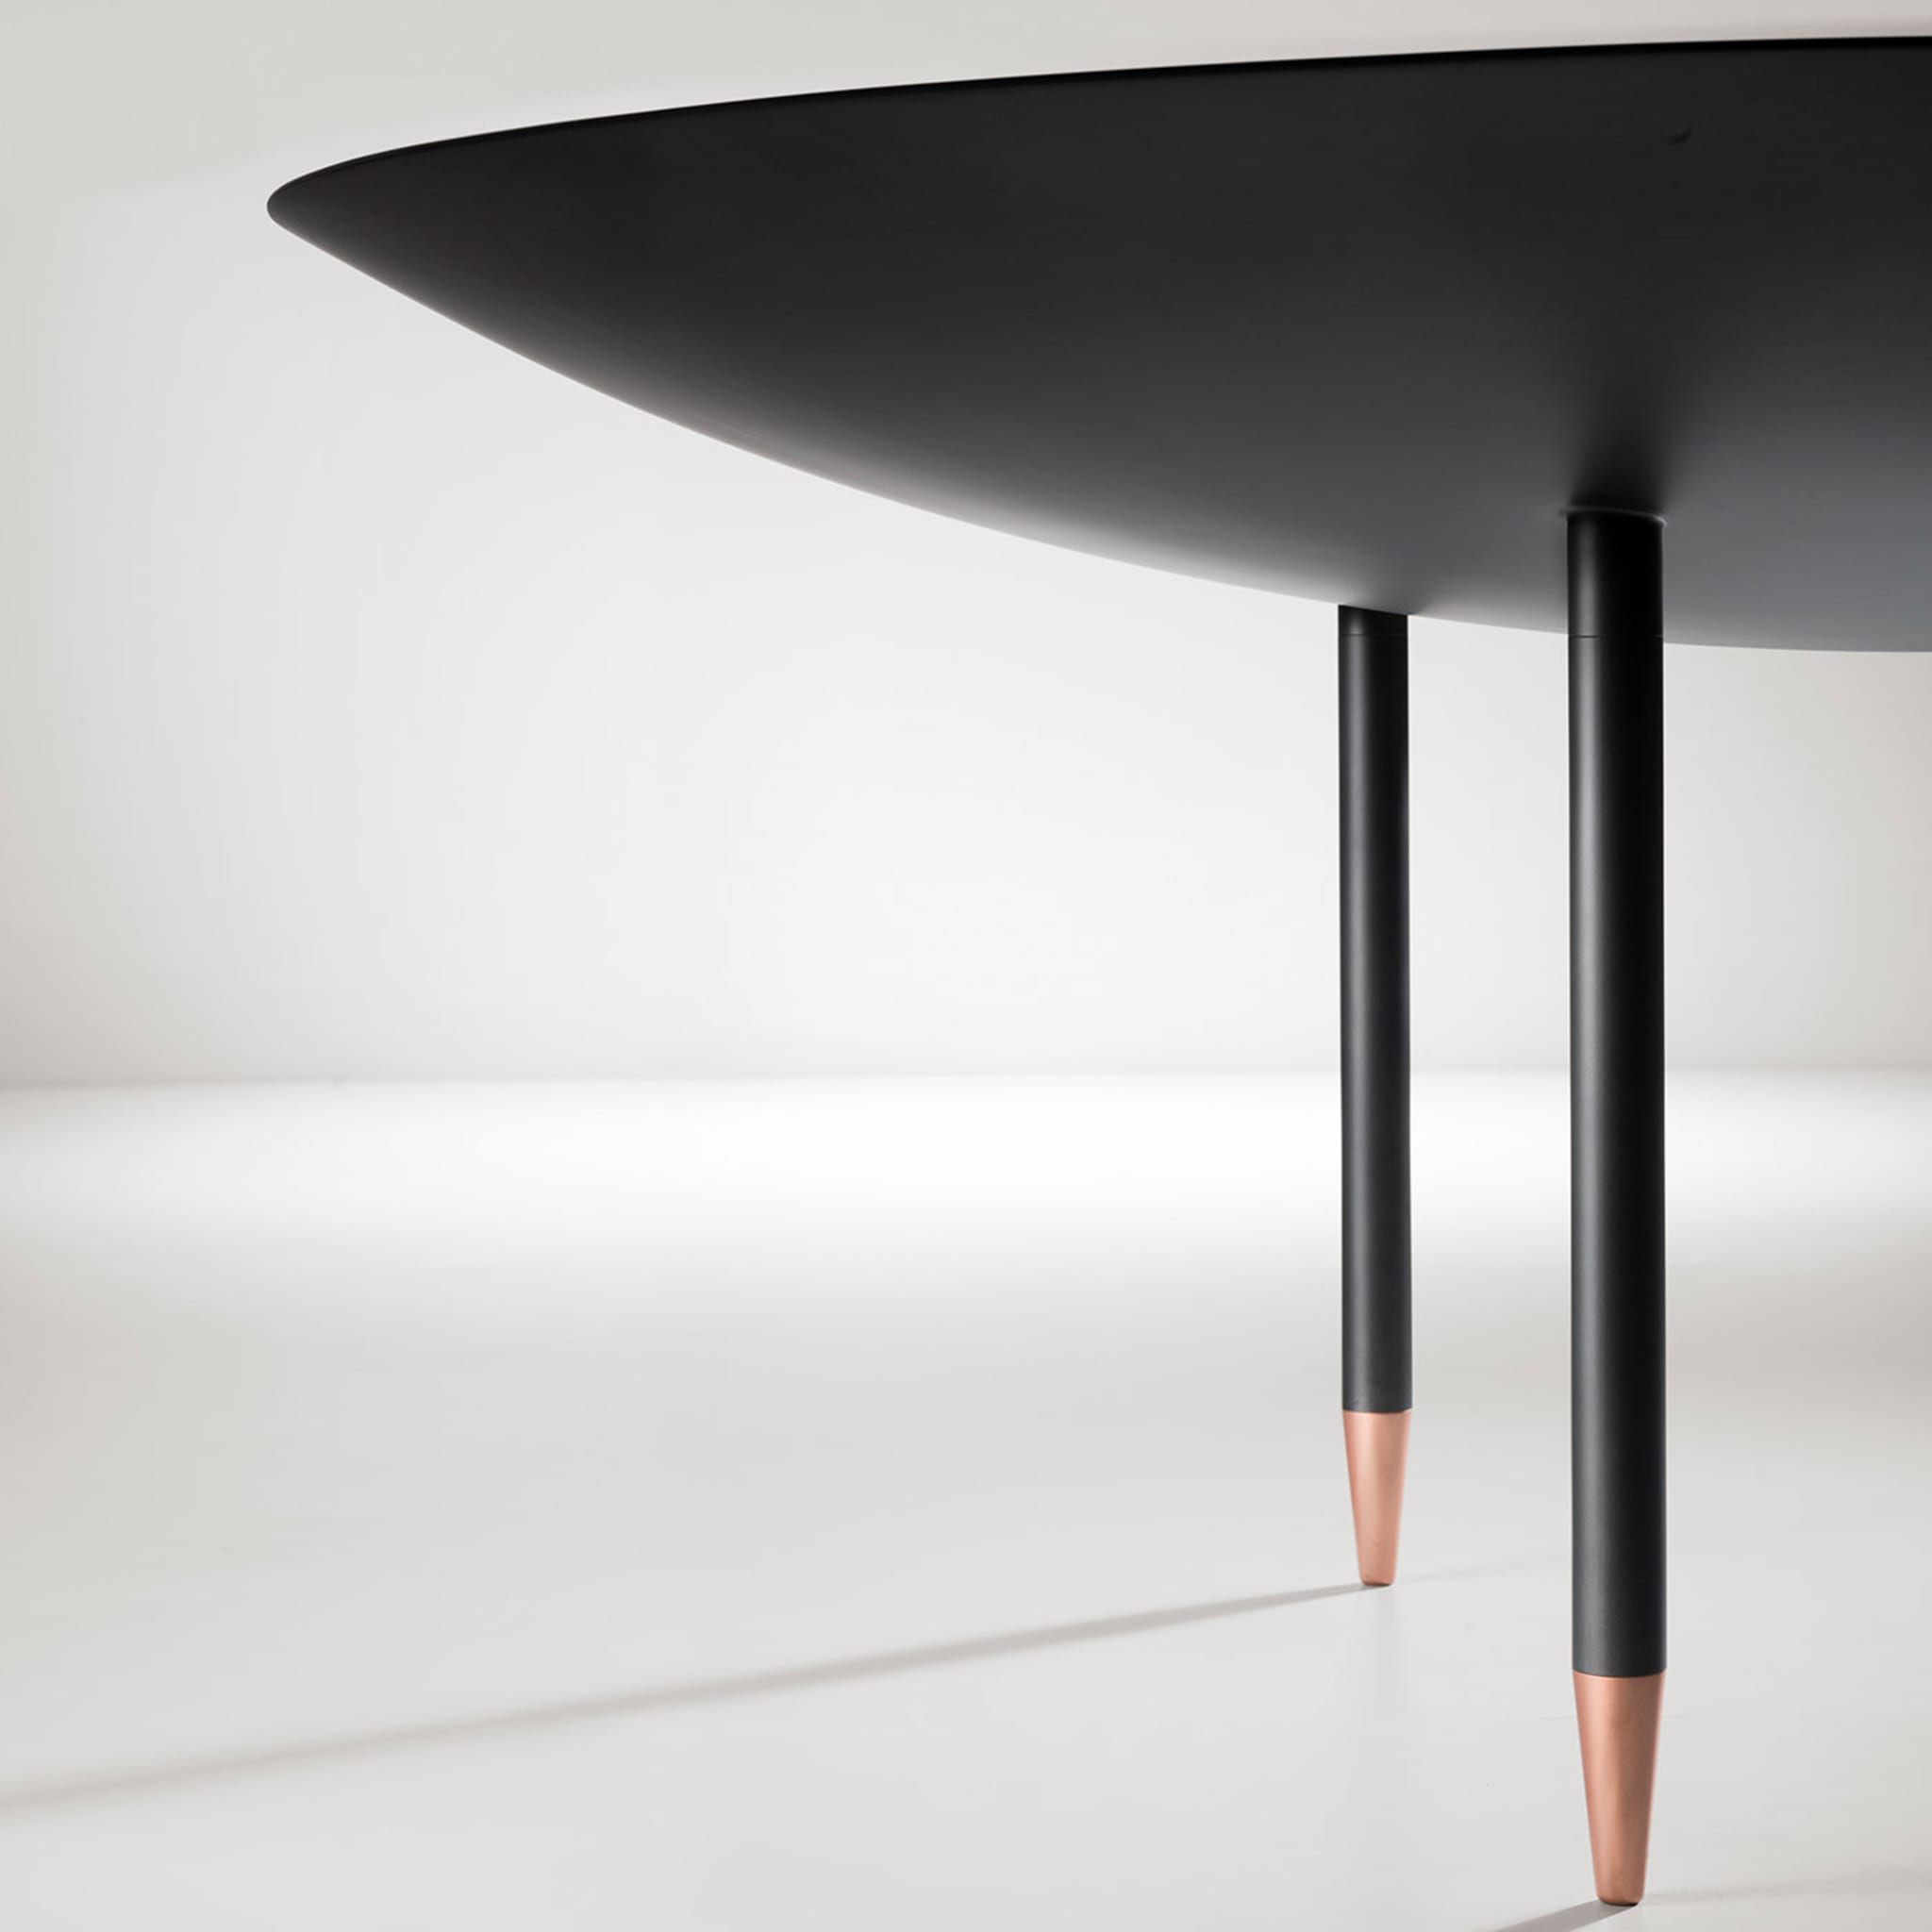 Roma Table by Giovanni Minelli and Marco Fossati - Alternative view 1